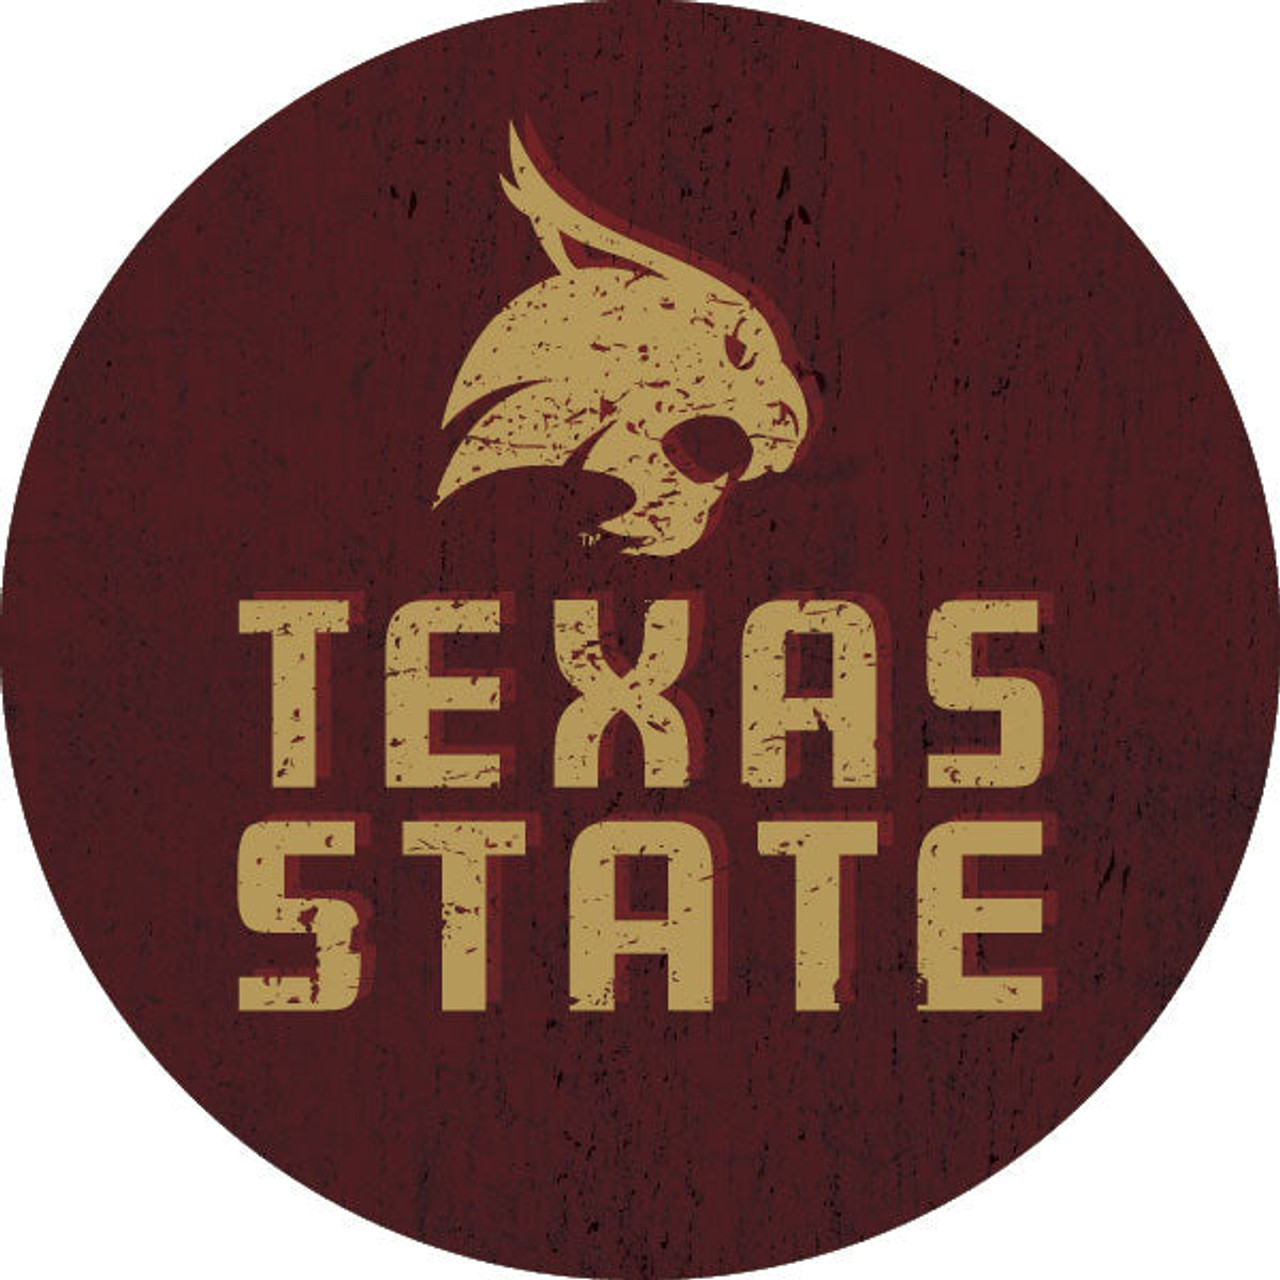 Texas State Bobcats Distressed Wood Grain 4 Inch Round Magnet